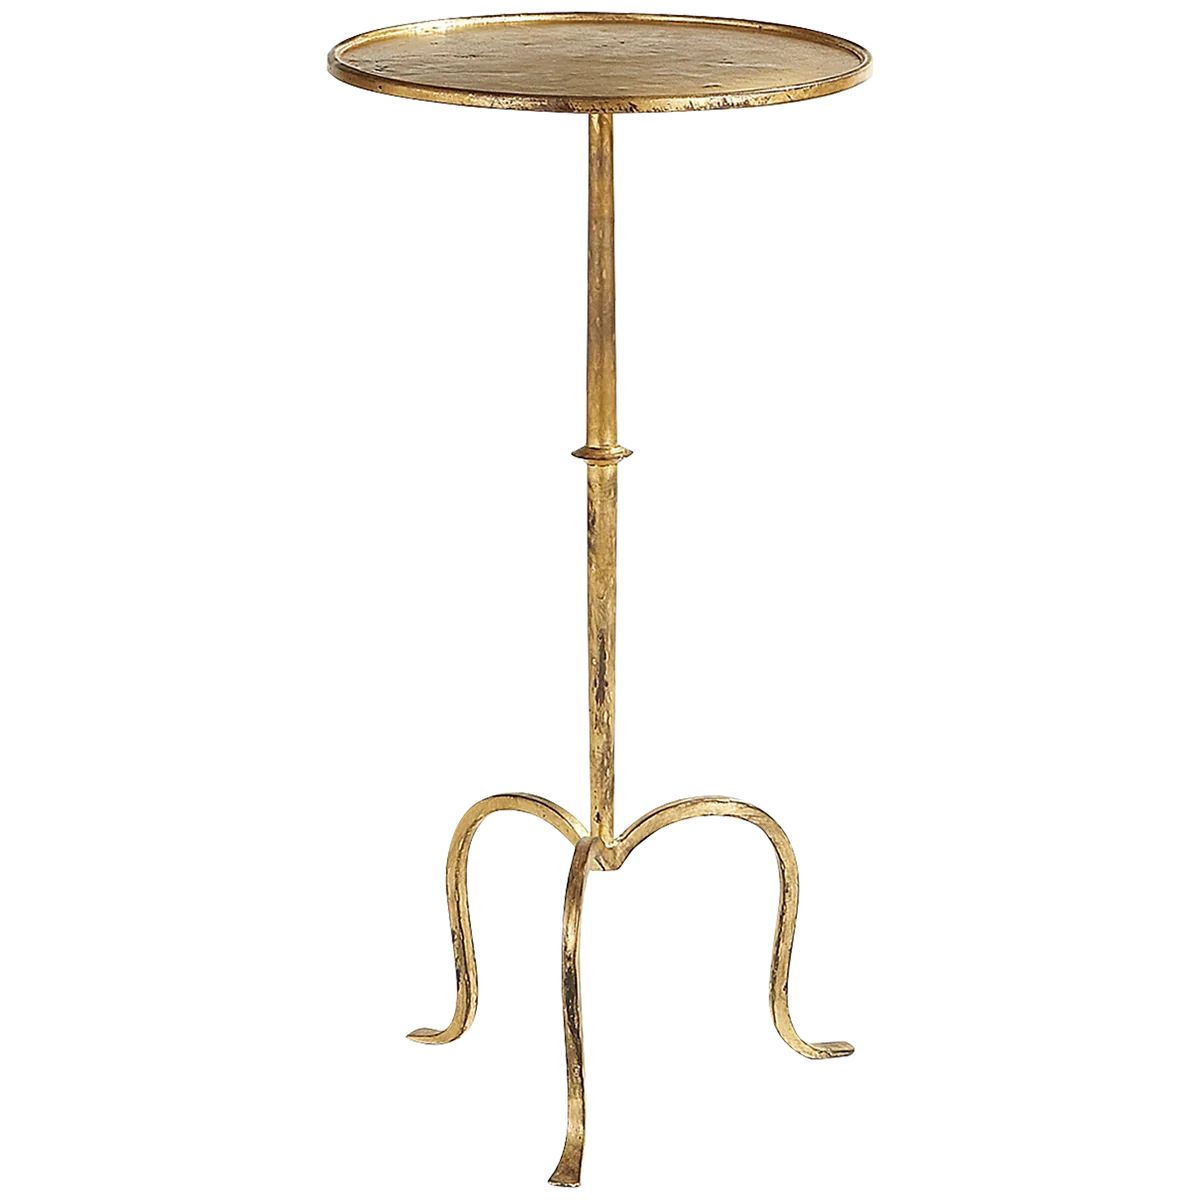 Hand-Forged Martini Table | Stoffer Home